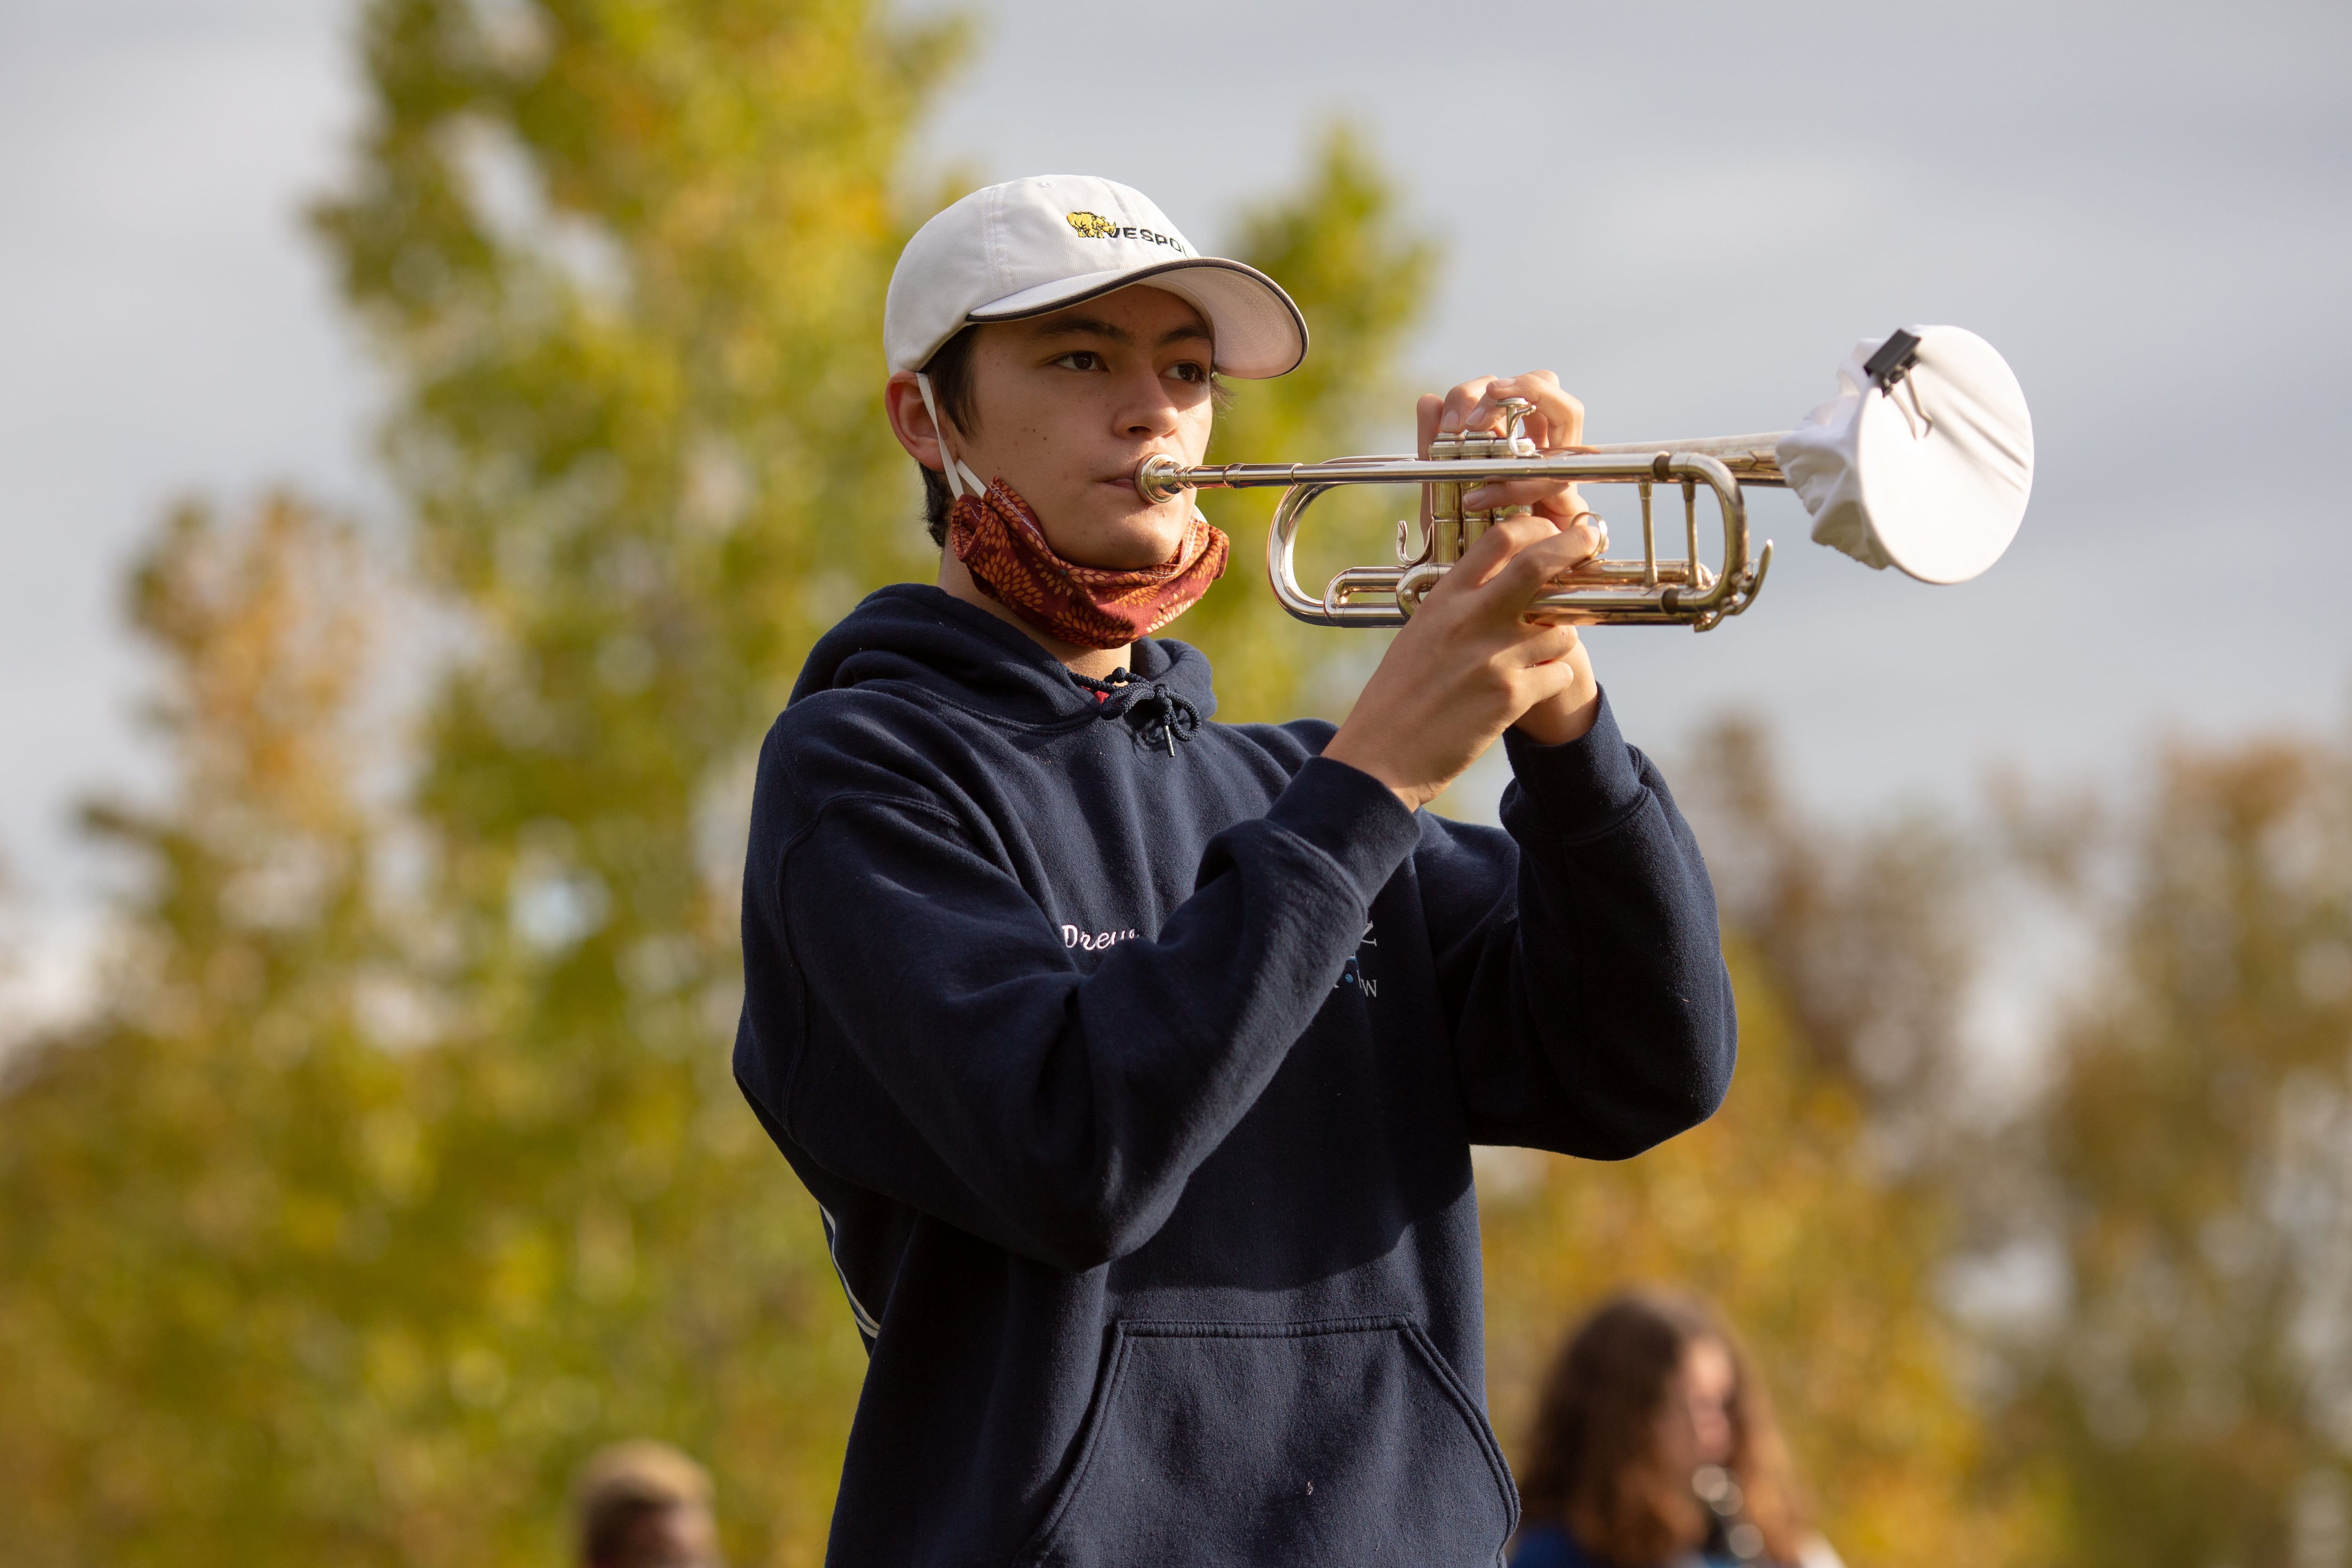 A student with a red mask below his chin plays a trumpet outside. Trees are in the background.